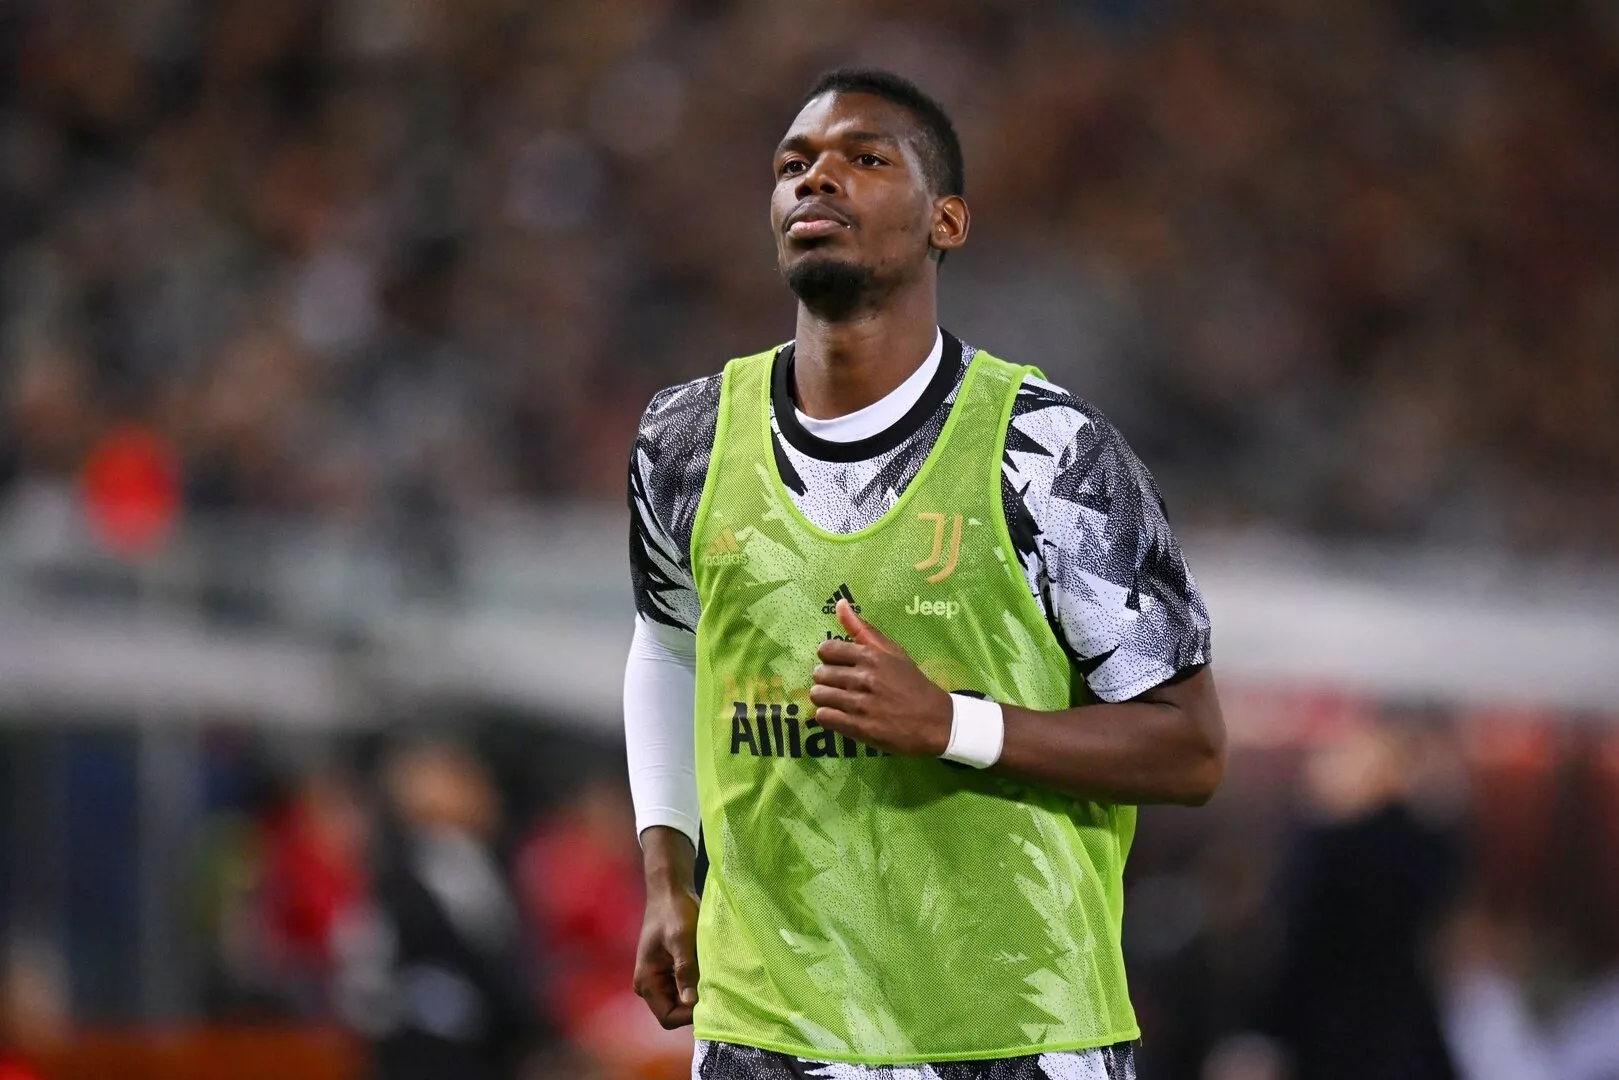 Juventus could terminate Paul Pogba’s contract following doping allegations